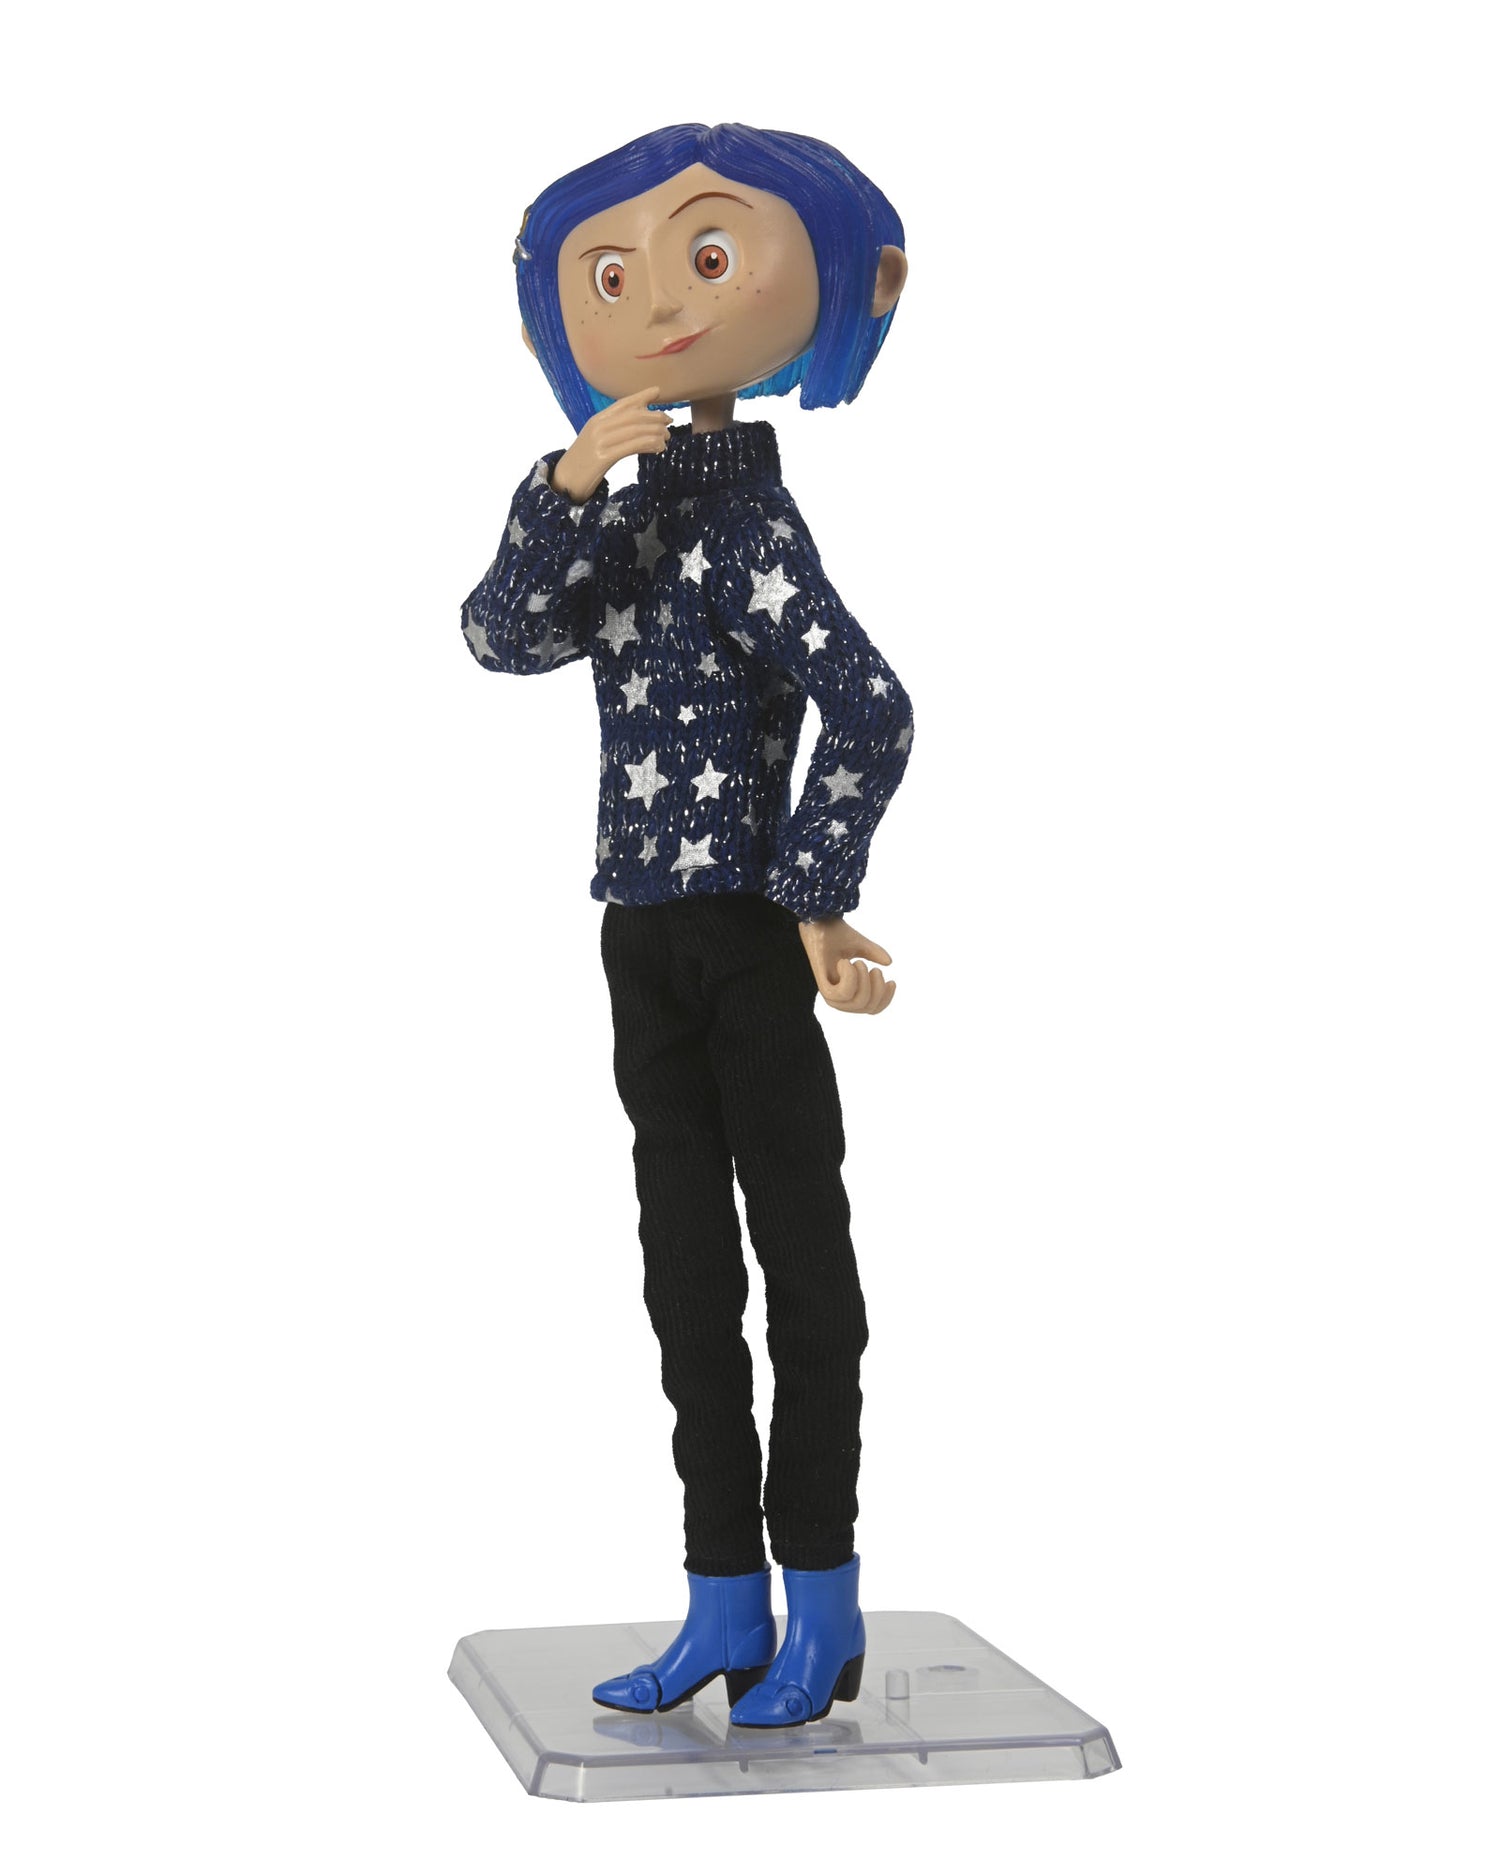 Coraline in Star Sweater 7” Articulated Figure standing up